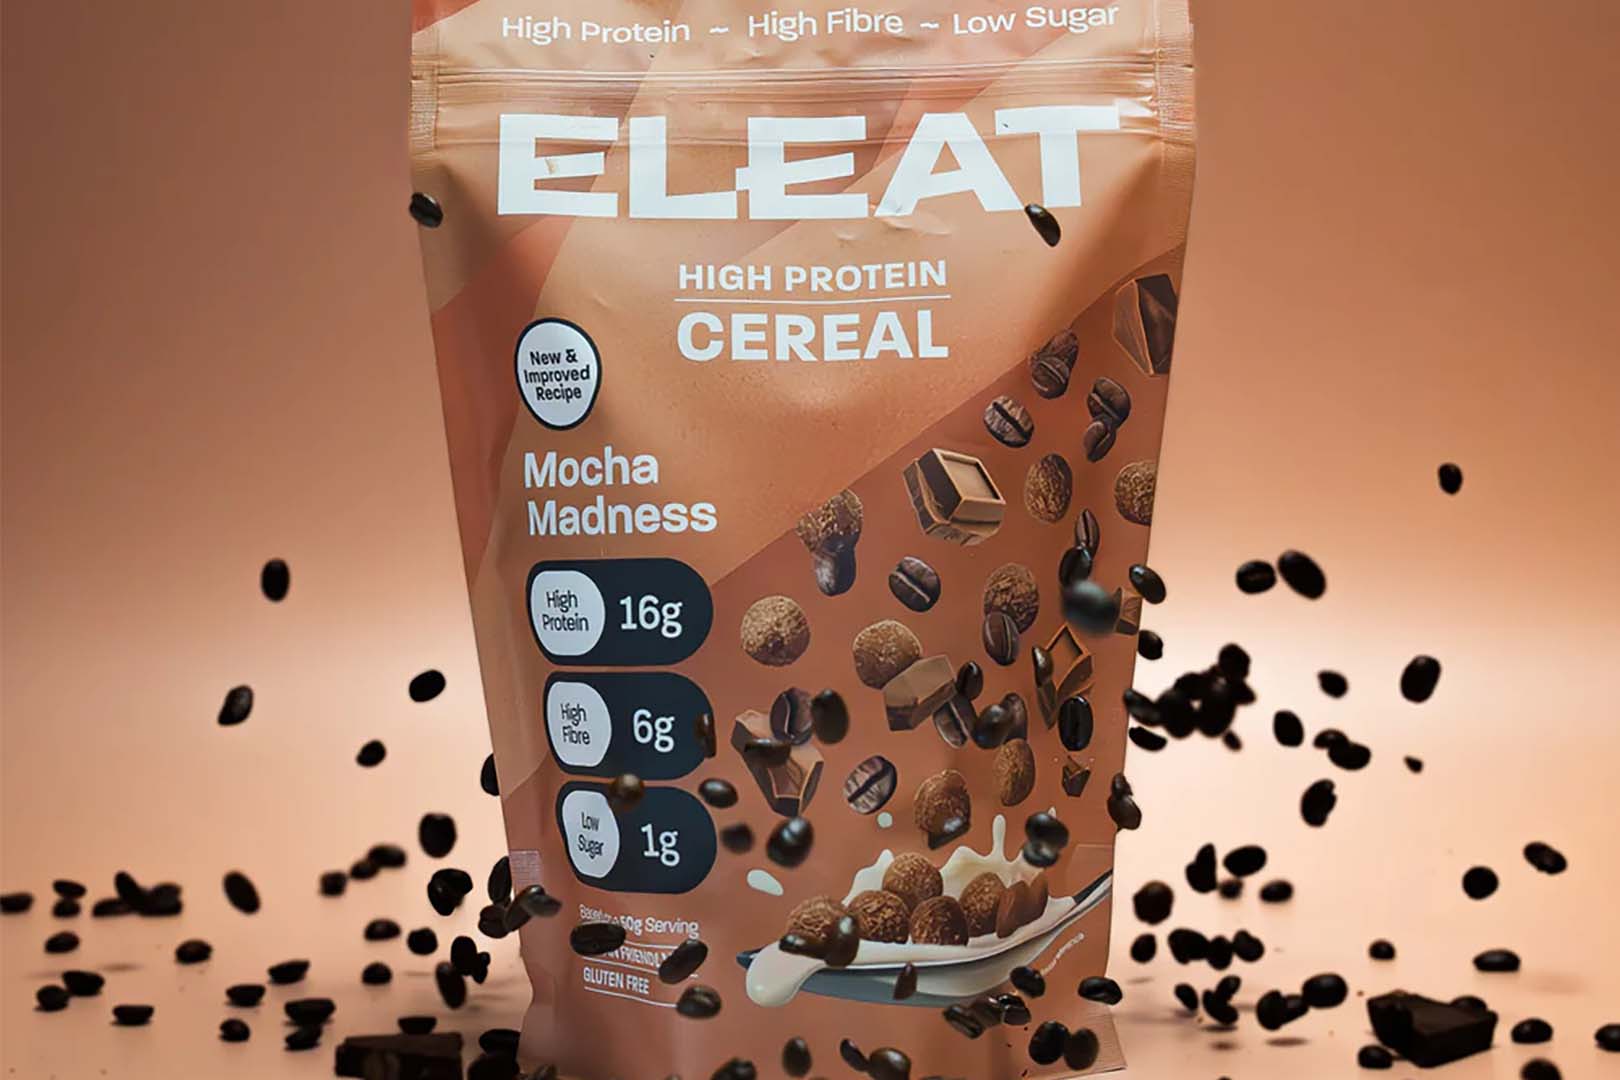 Mocha Madness Eleat High Protein Cereal